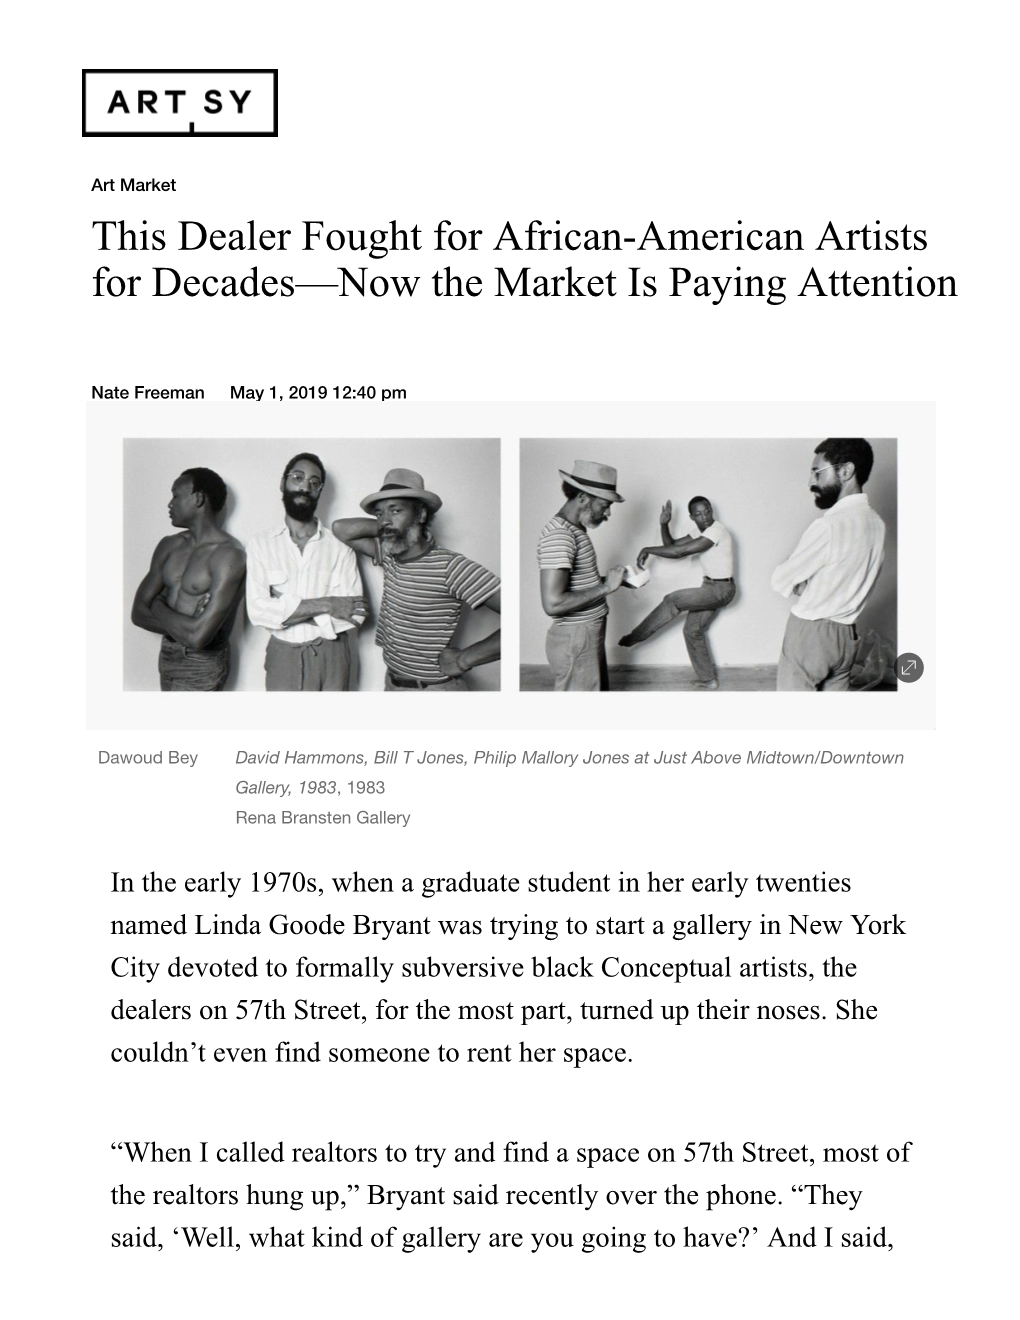 This Dealer Fought for Africanamerican Artists for Decades—Now the Market Is Paying Attention